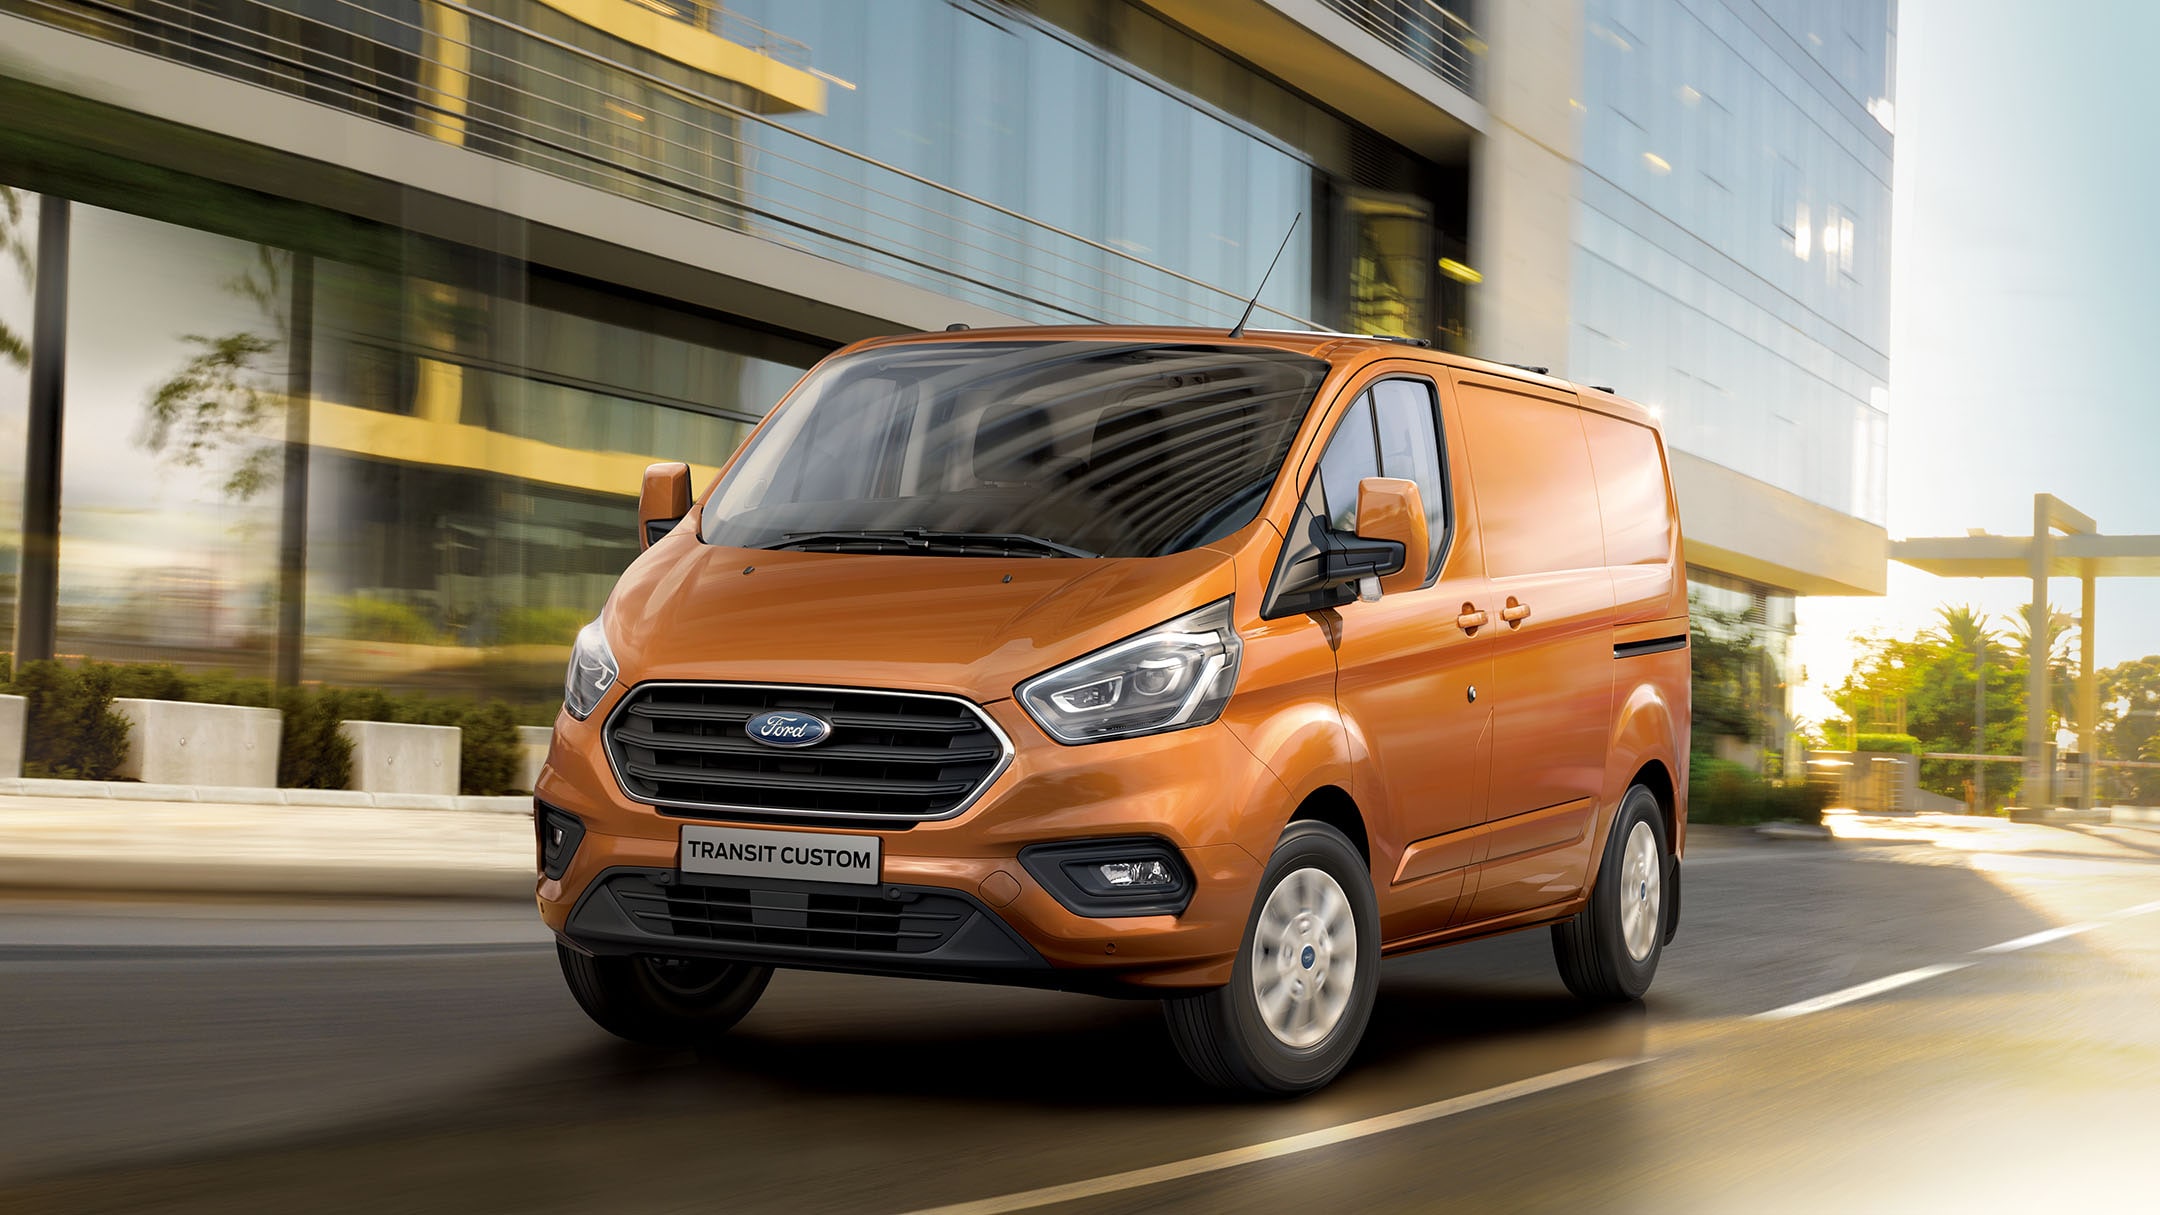 New Ford Transit Custom driving next to glass building